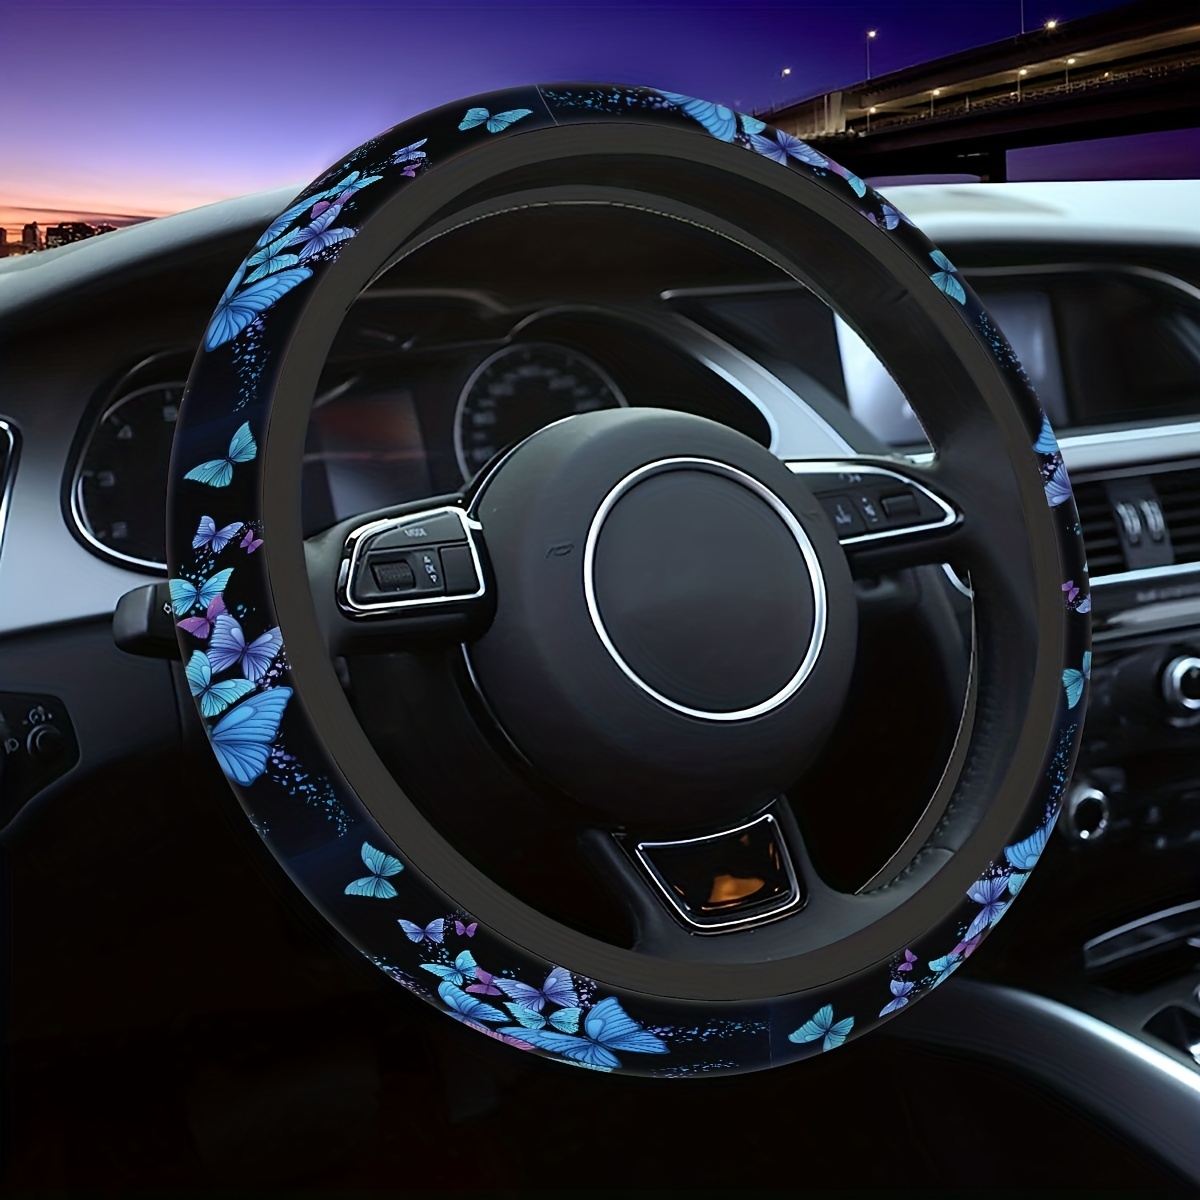 

Add A Touch Of Elegance To Your Ride With A Black Bottom Blue Butterfly Print Steering Wheel Cover